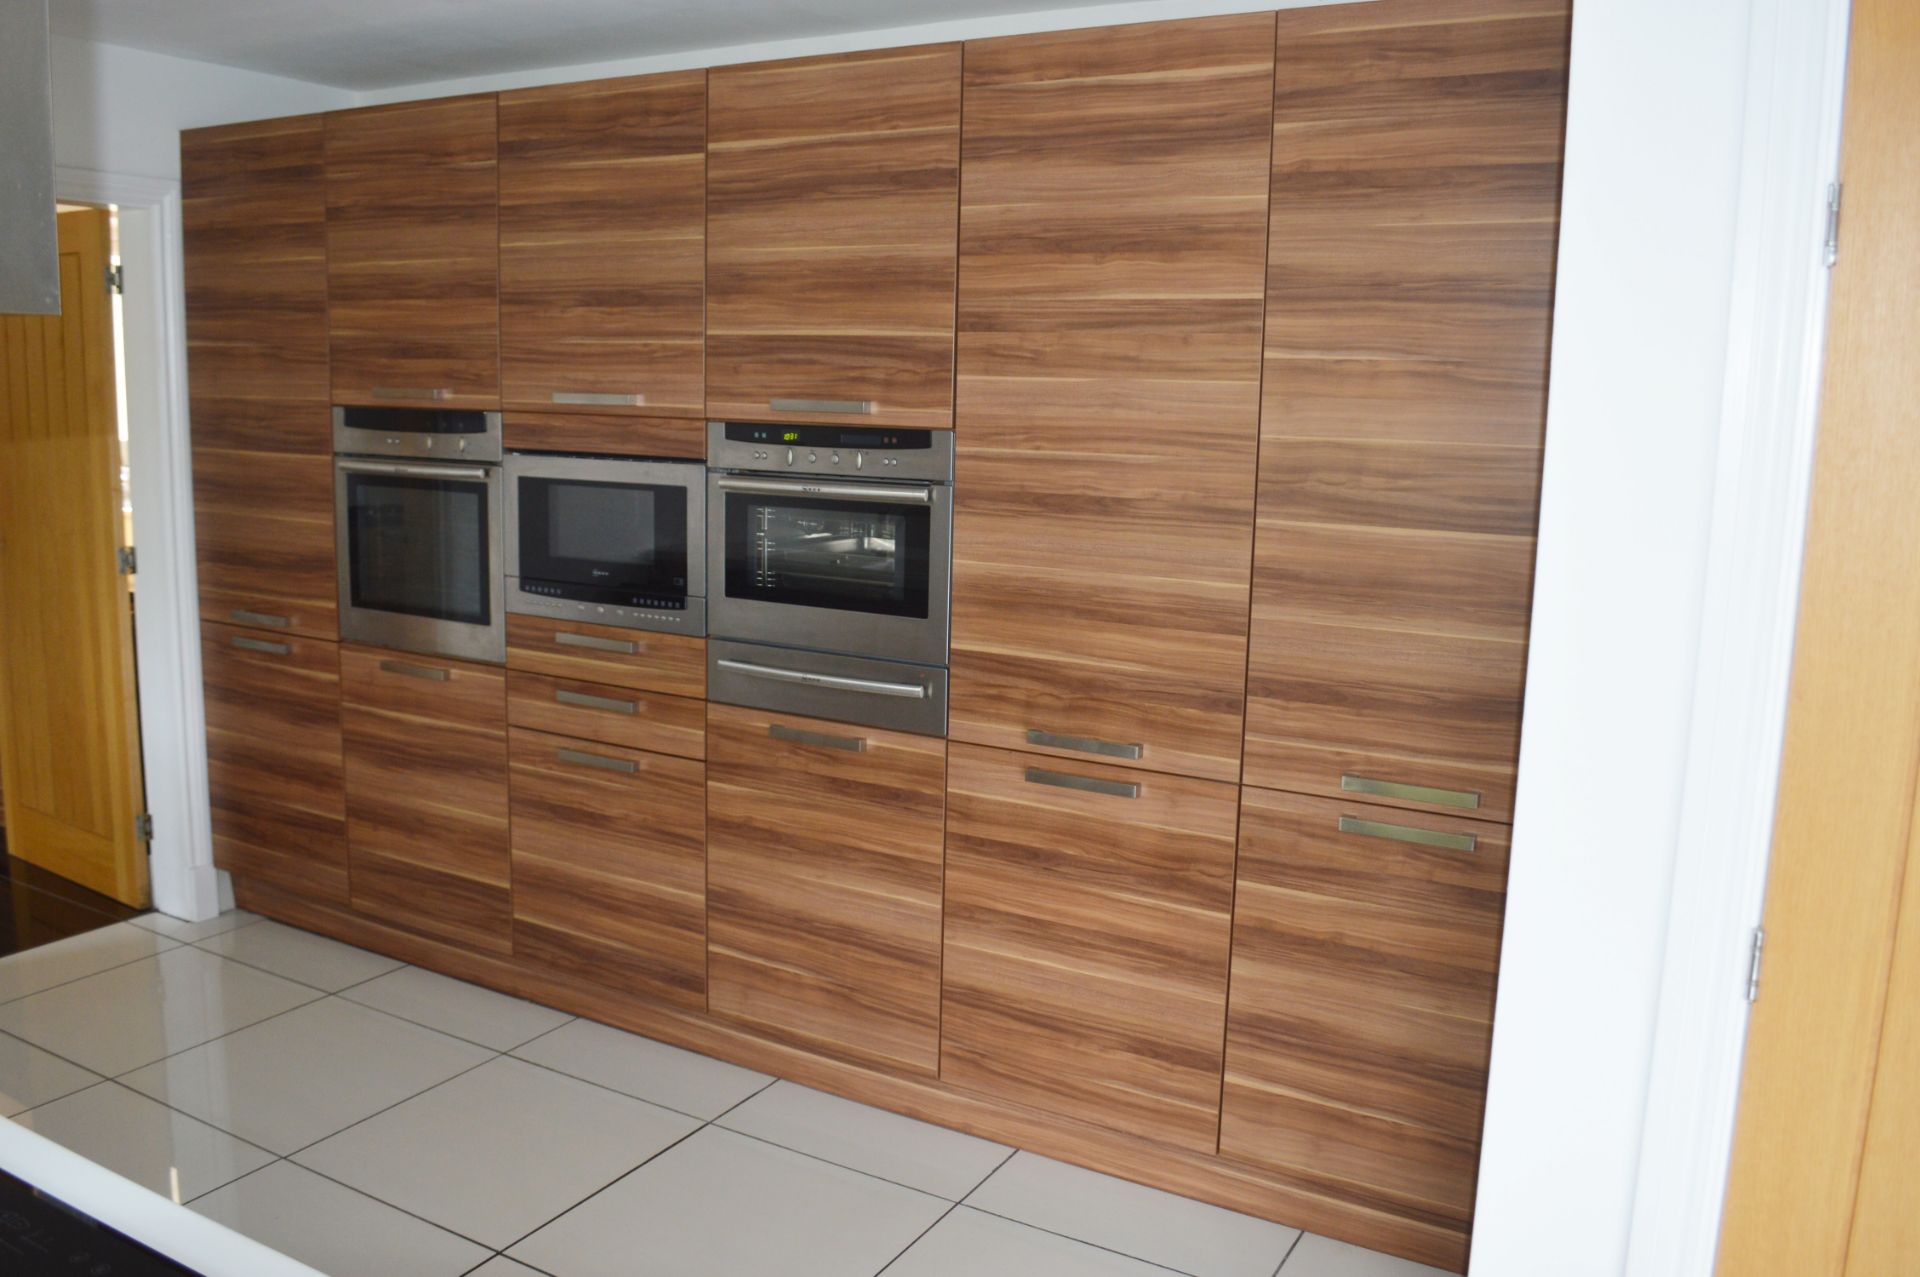 1 x Contemporary Bespoke Fitted Kitchen With Neff Branded Appliances - Collection Date: 1st November - Image 45 of 52